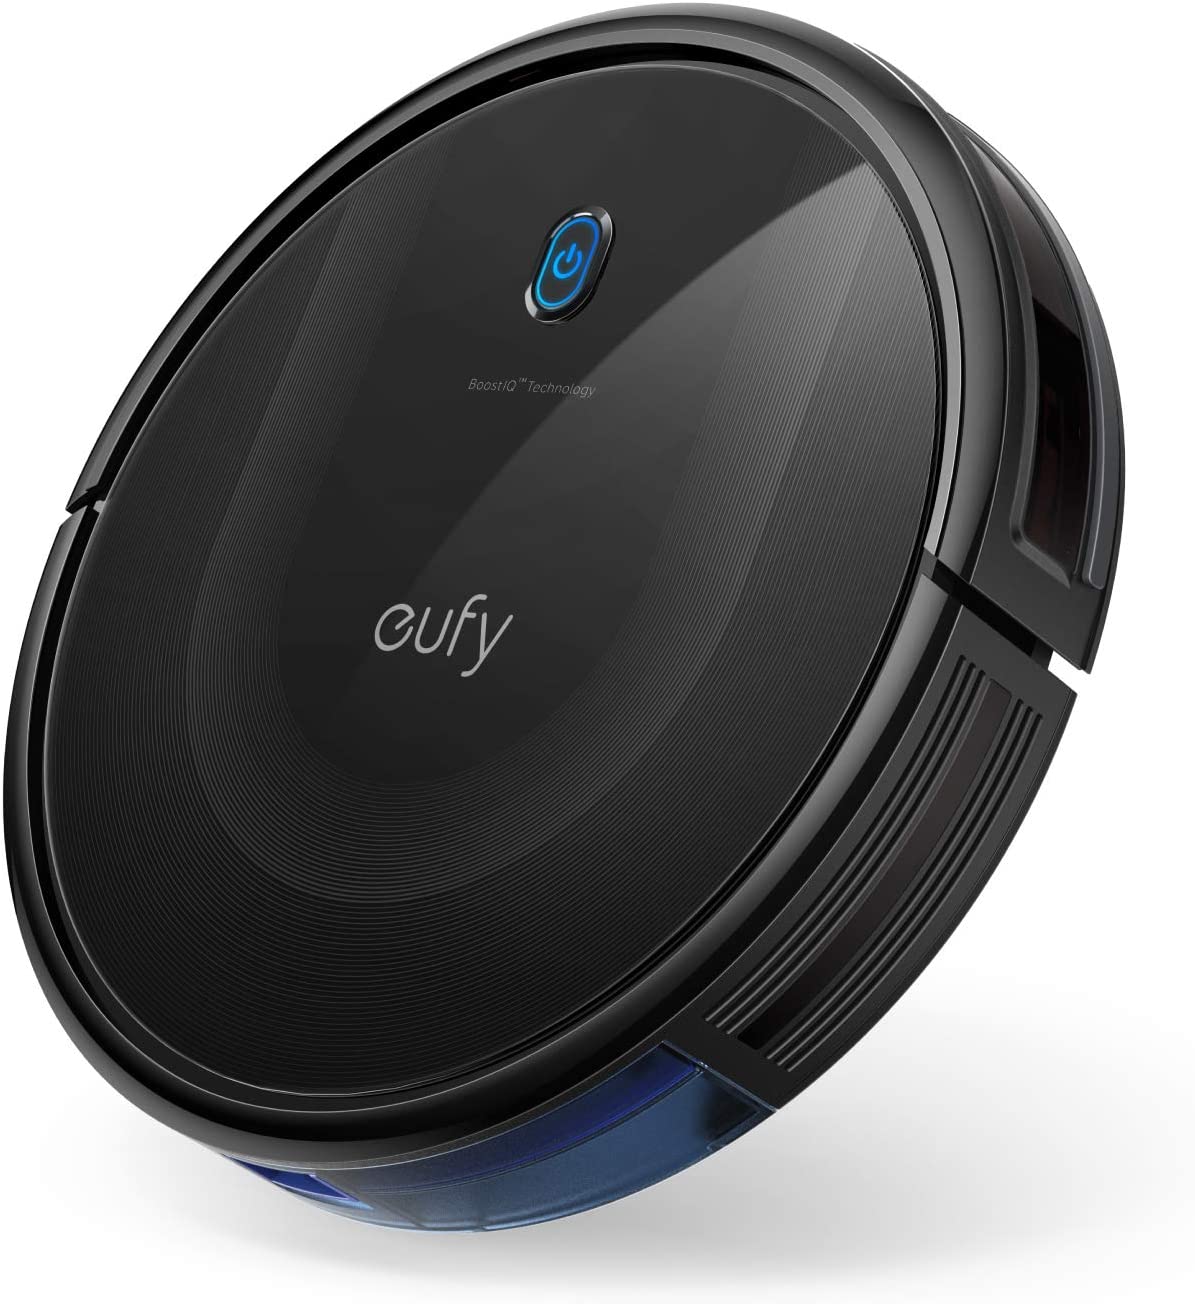 Eufy by Anker RoboVac 11S MAX 2000Pa Suction Robot Vacuum Cleaner $130 + Free Shipping